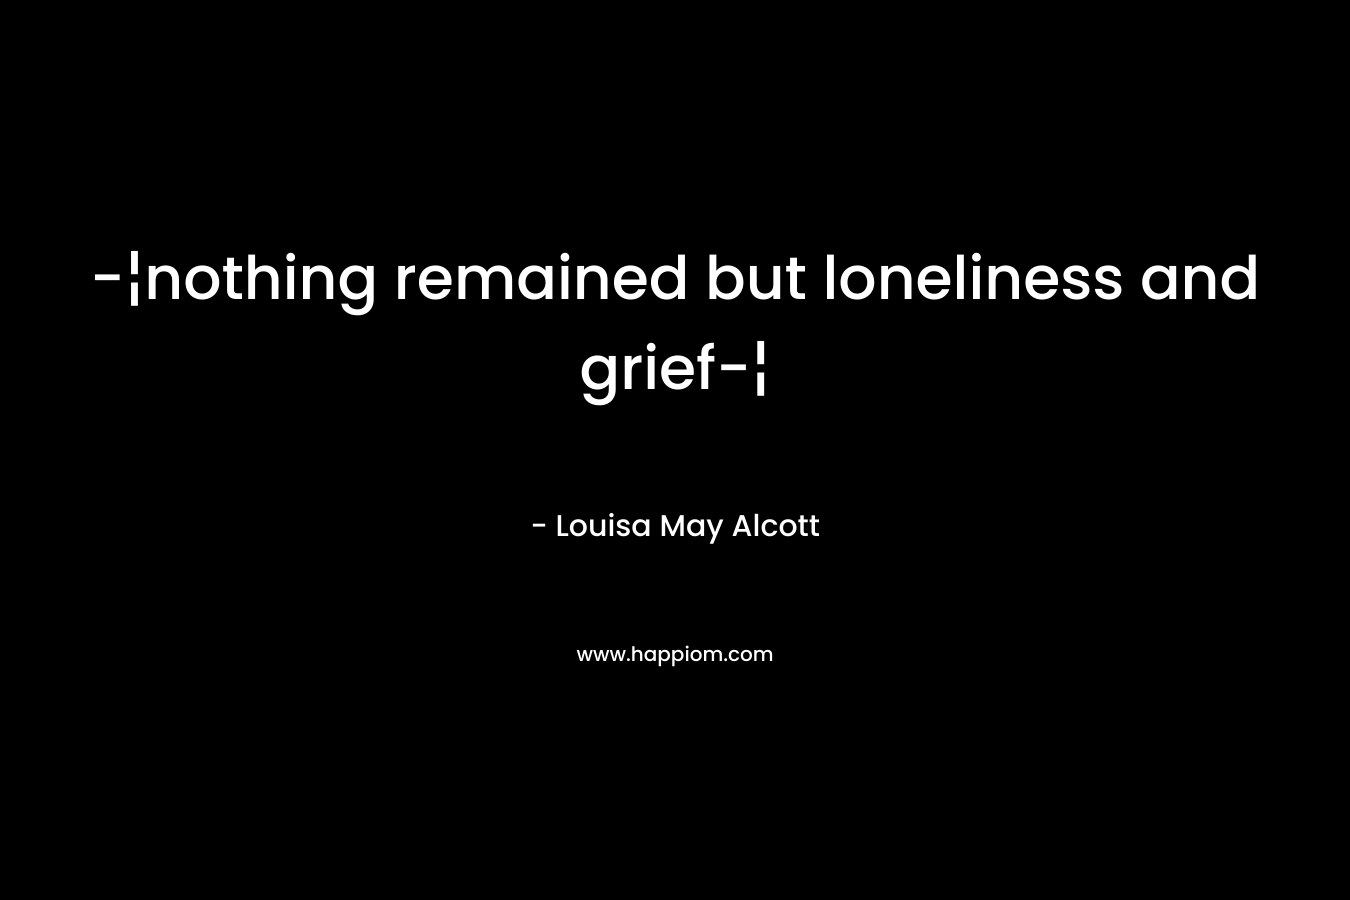 -¦nothing remained but loneliness and grief-¦